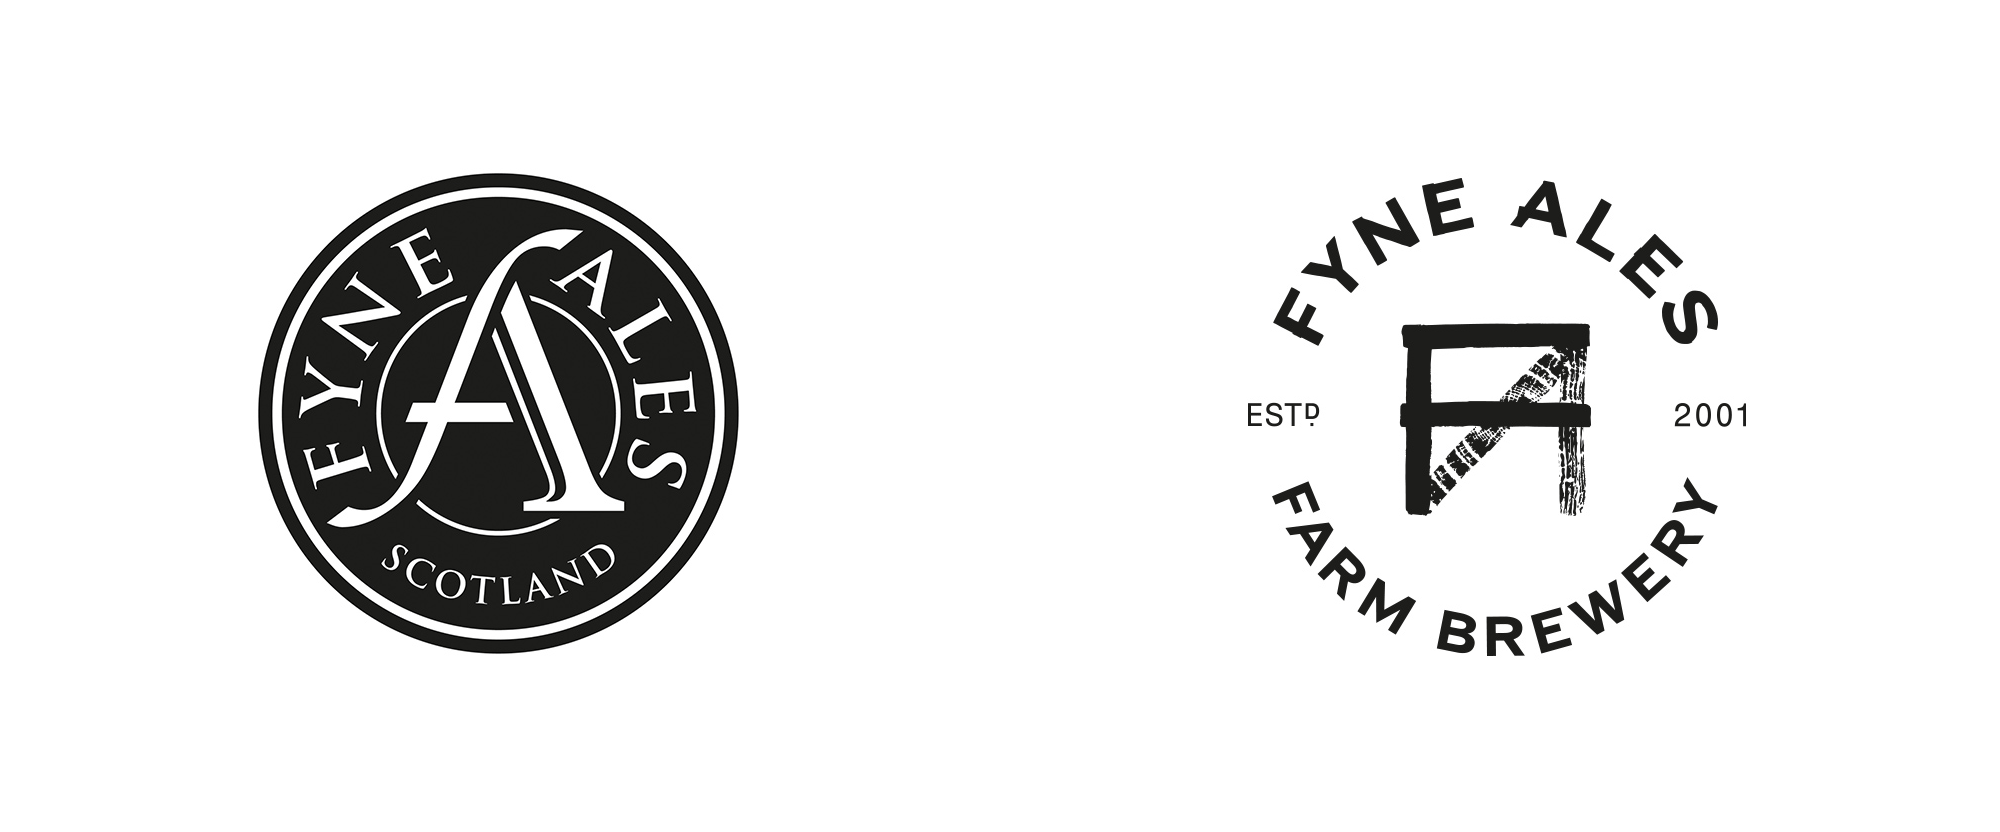 New Logo and Packaging for Fyne Ales by O Street